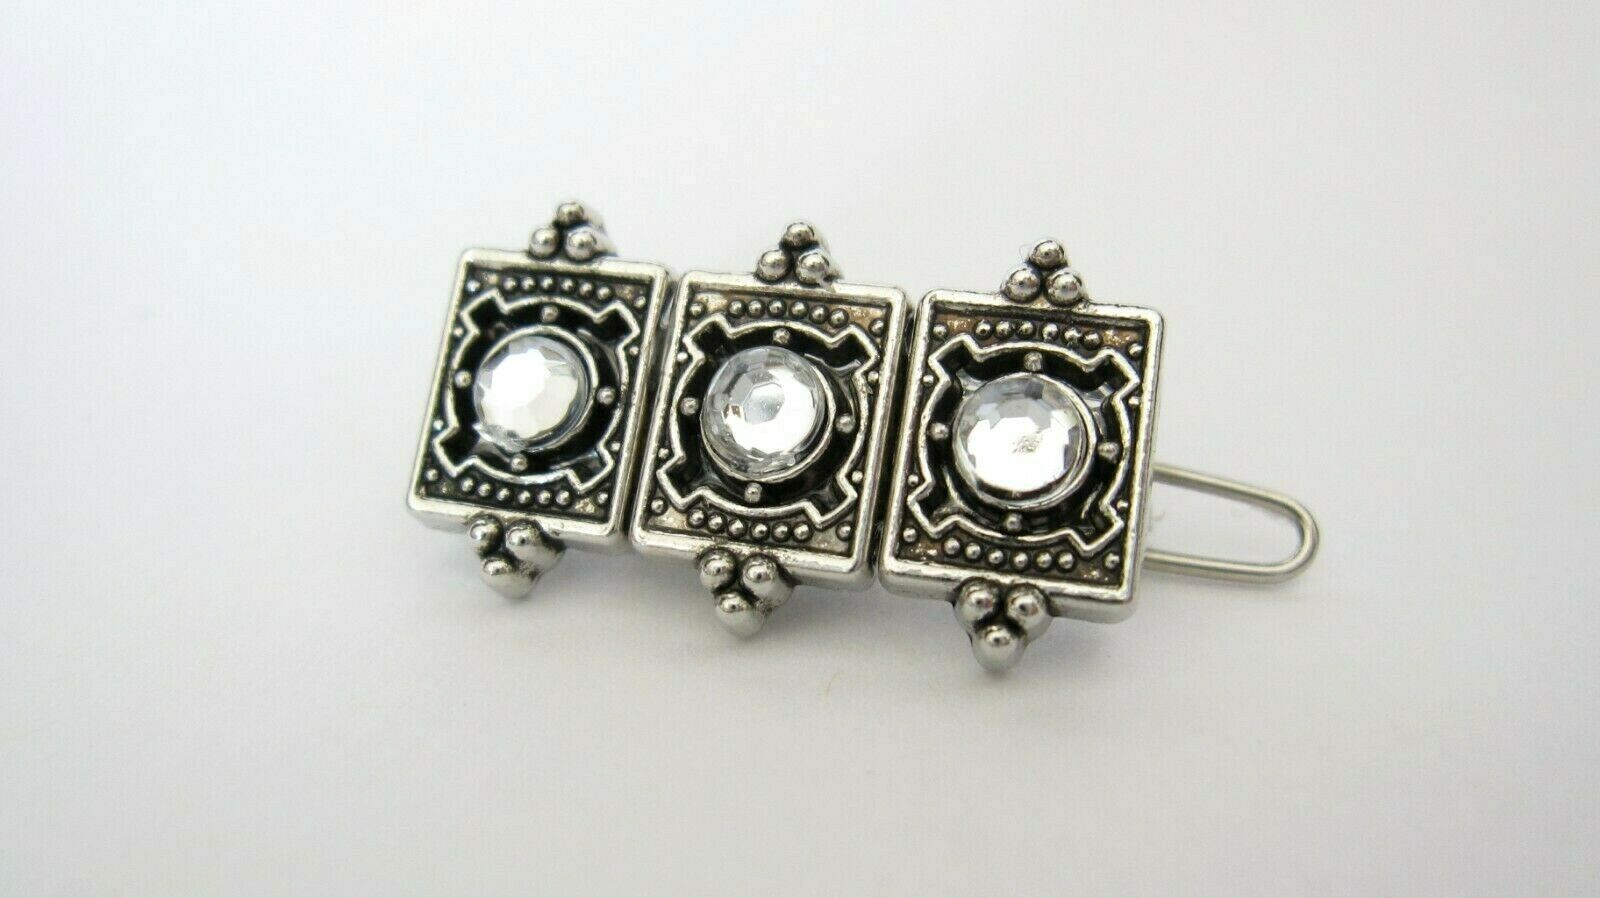 Small tiny silver metal filigree and crystal hair clip barrette for fine hair